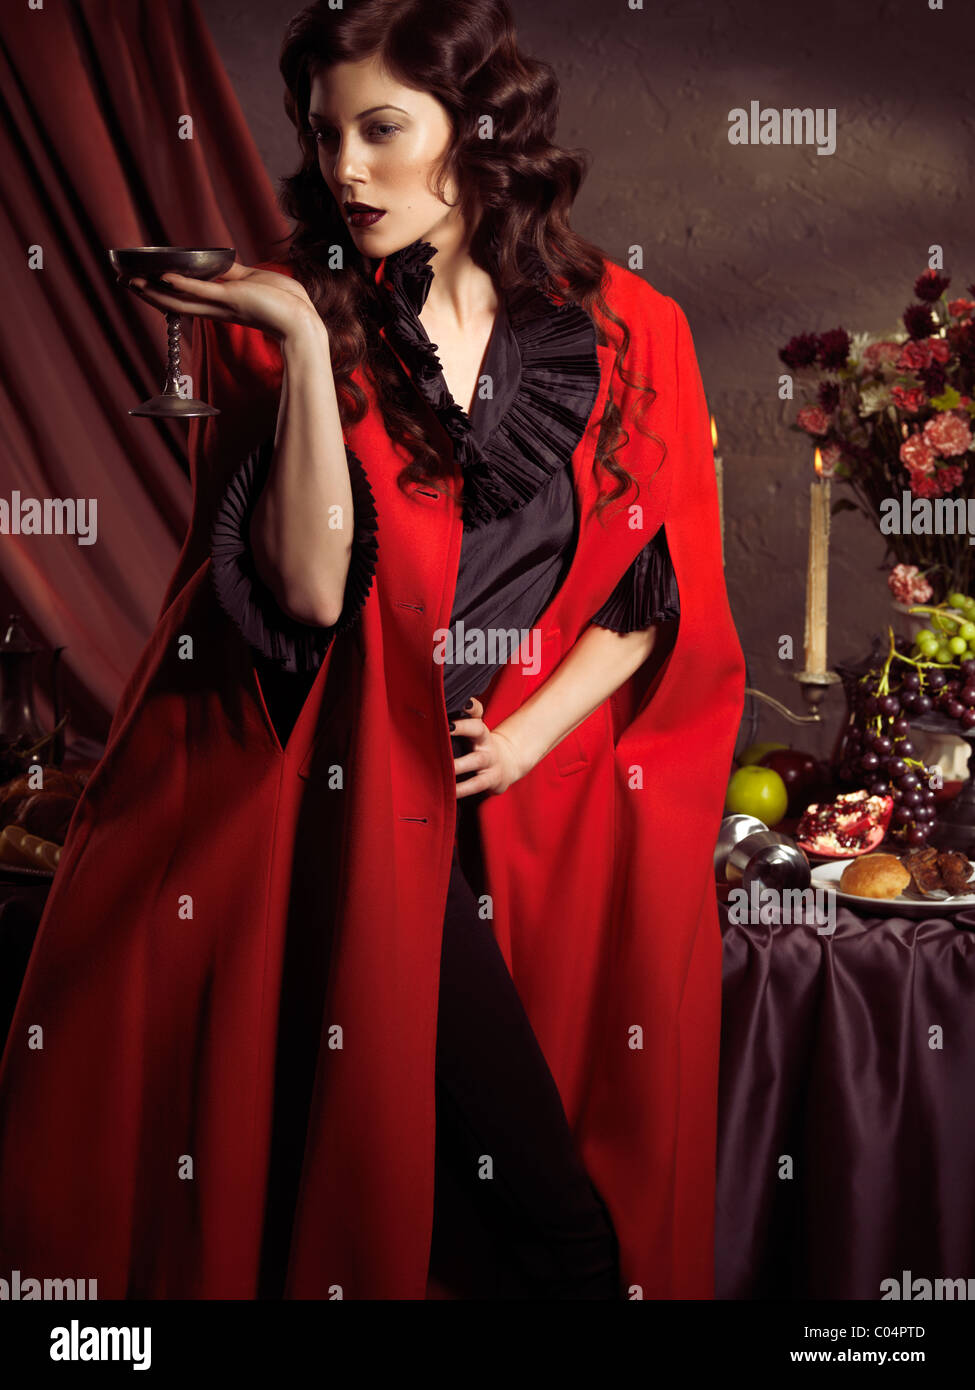 License and prints at MaximImages.com - High fashion photo of a beautiful woman standing with a glass of wine at a table with remains of a festive din Stock Photo